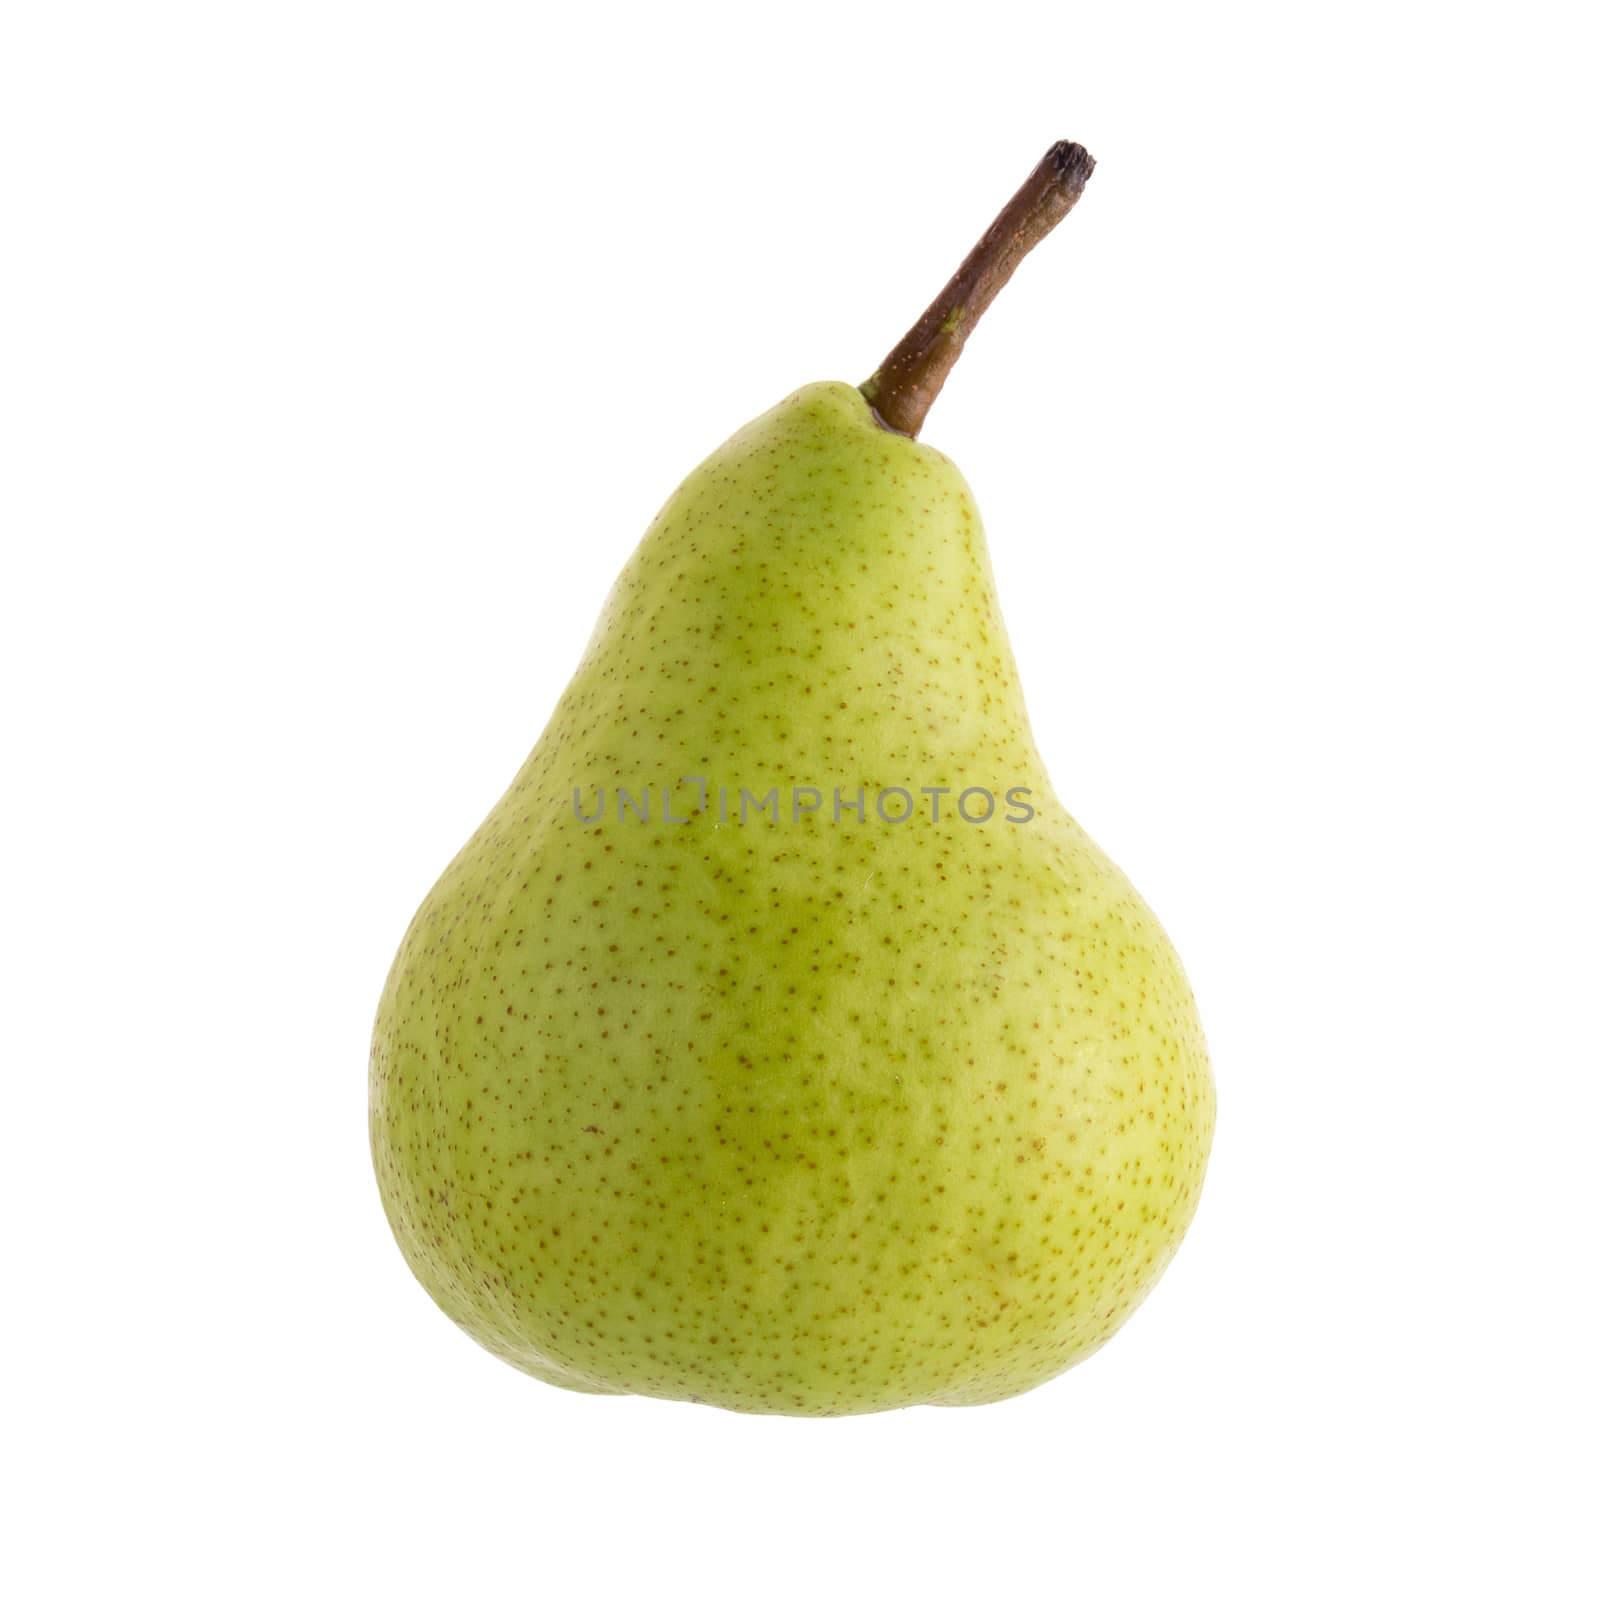 Ripe green pears isolated on a white background.